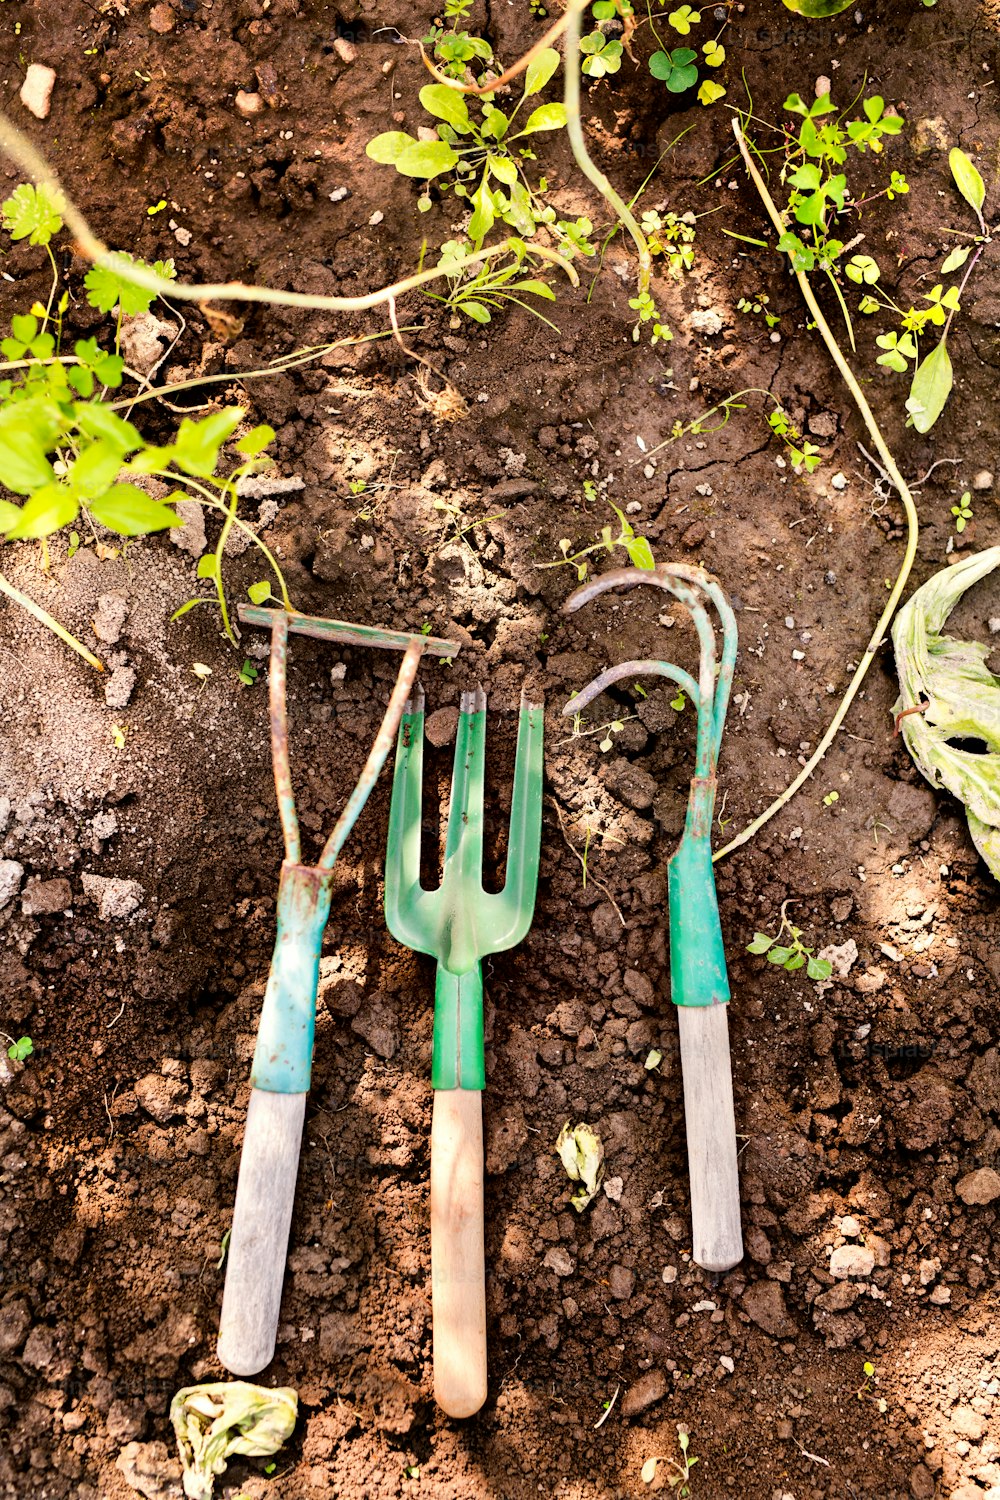 Close up of garden tools in the garden. Hand fork, hoe and cultivator on the ground. Close up.